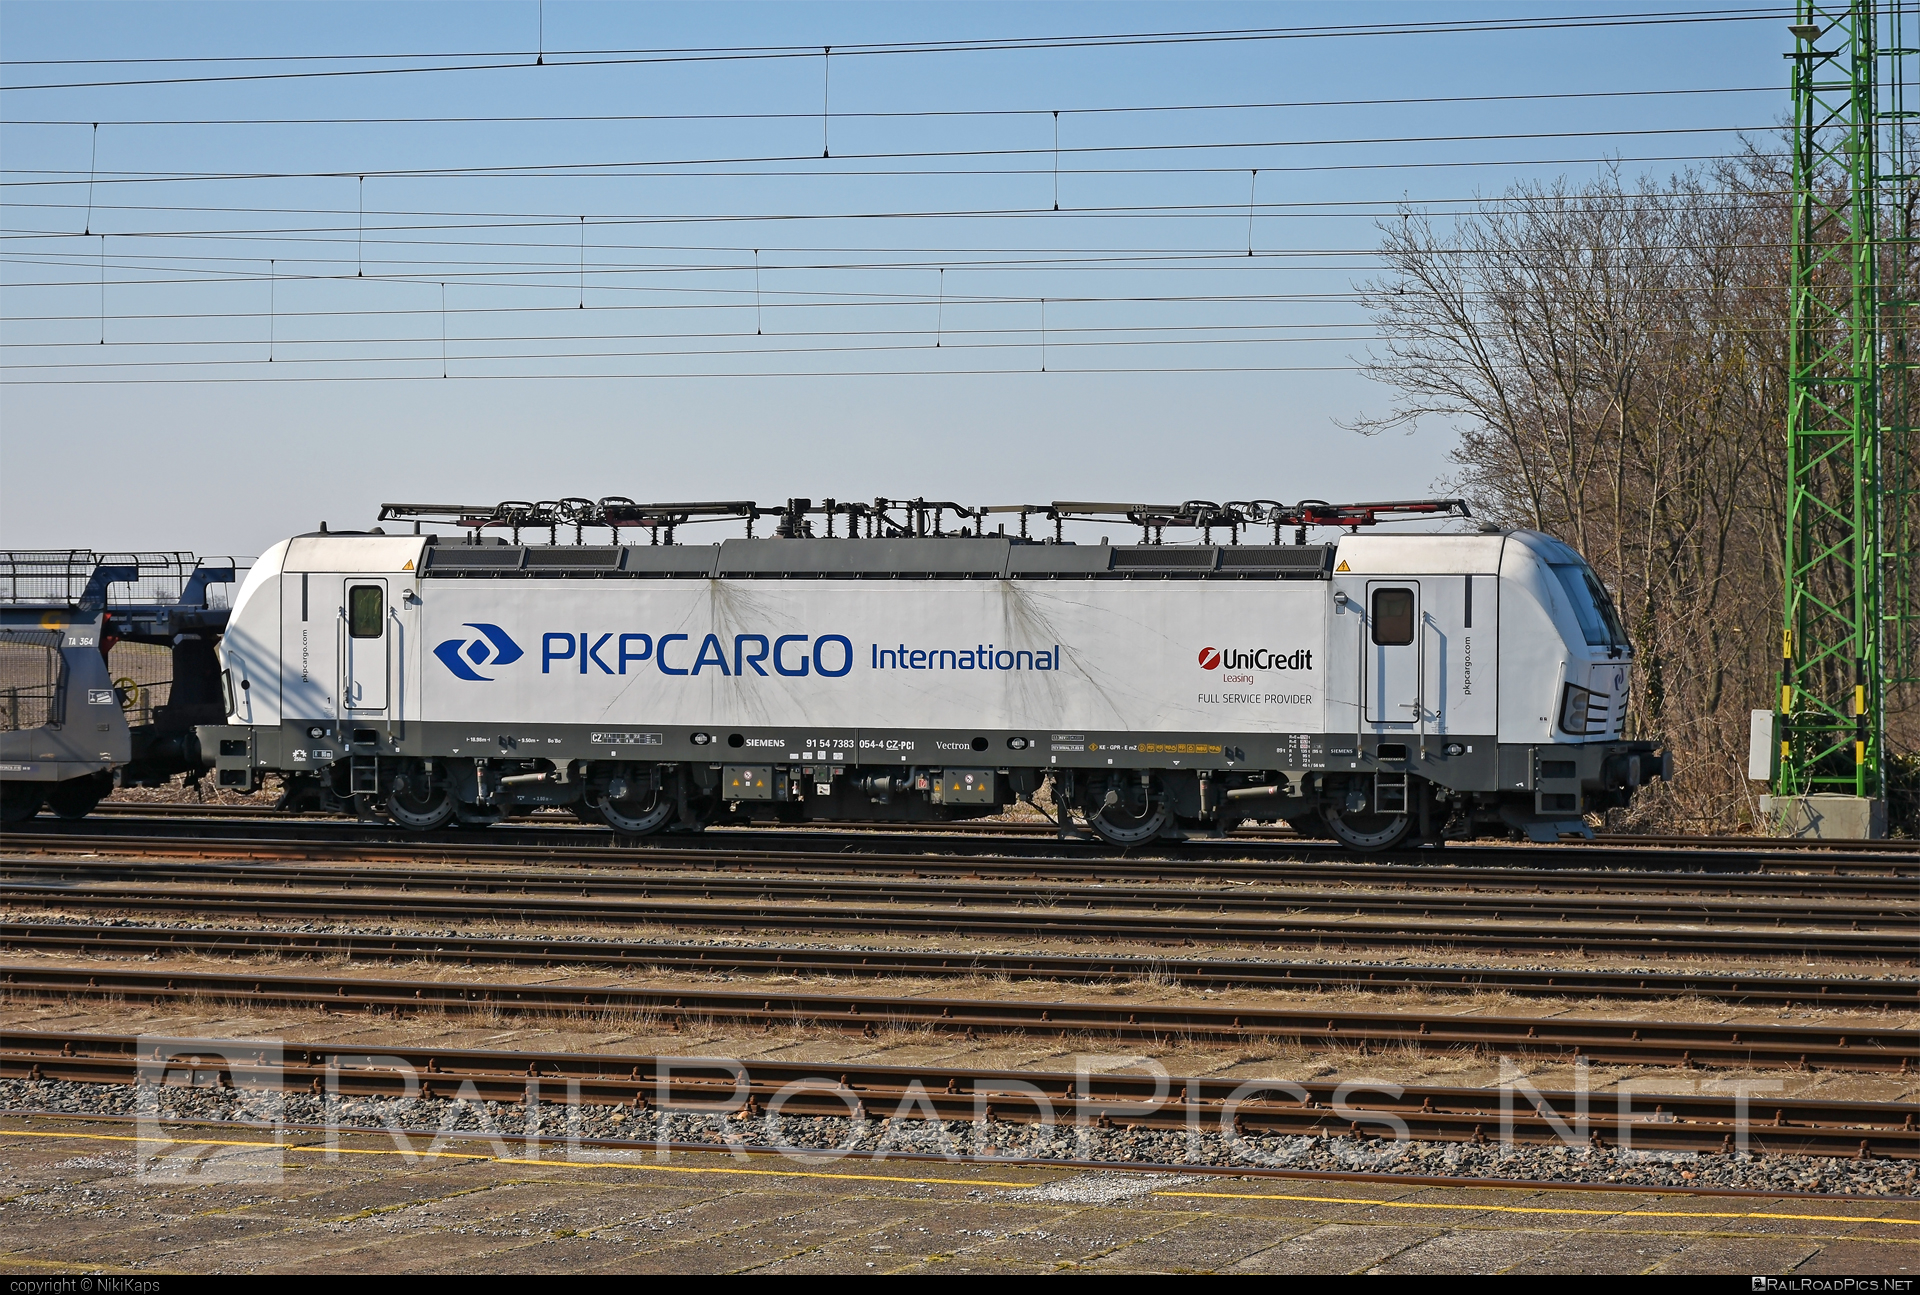 Siemens Vectron MS - 383 054 operated by PKP CARGO INTERNATIONAL a.s. #pkpcargointernational #pkpcargointernationalas #pkpci #siemens #siemensVectron #siemensVectronMS #vectron #vectronMS